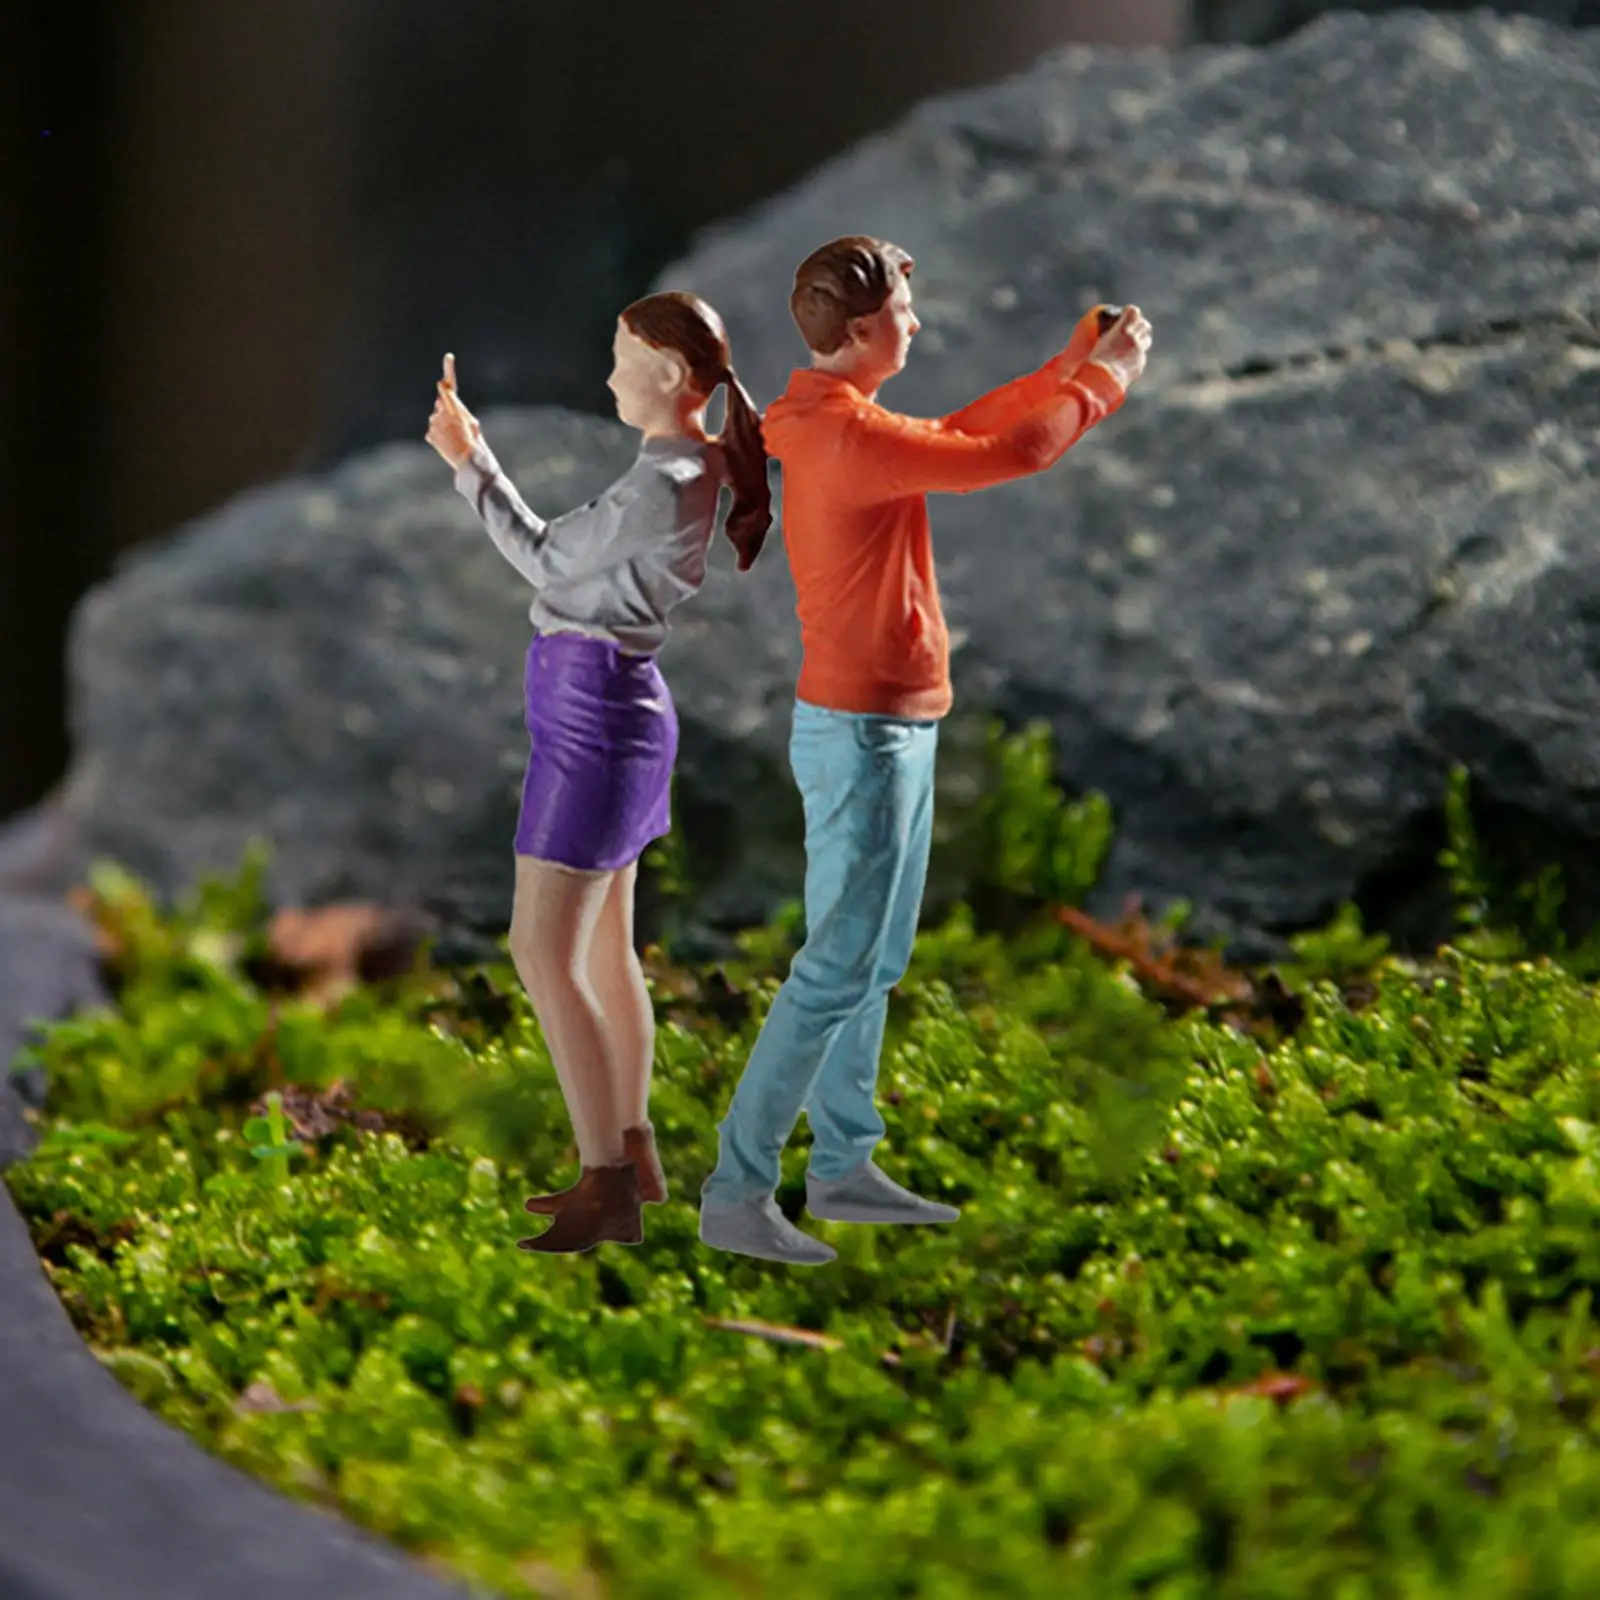 2x Miniature 1/64 Couple Figures Model Trains People Figures for Diorama Dollhouse Micro Landscapes Photography Props Decoration